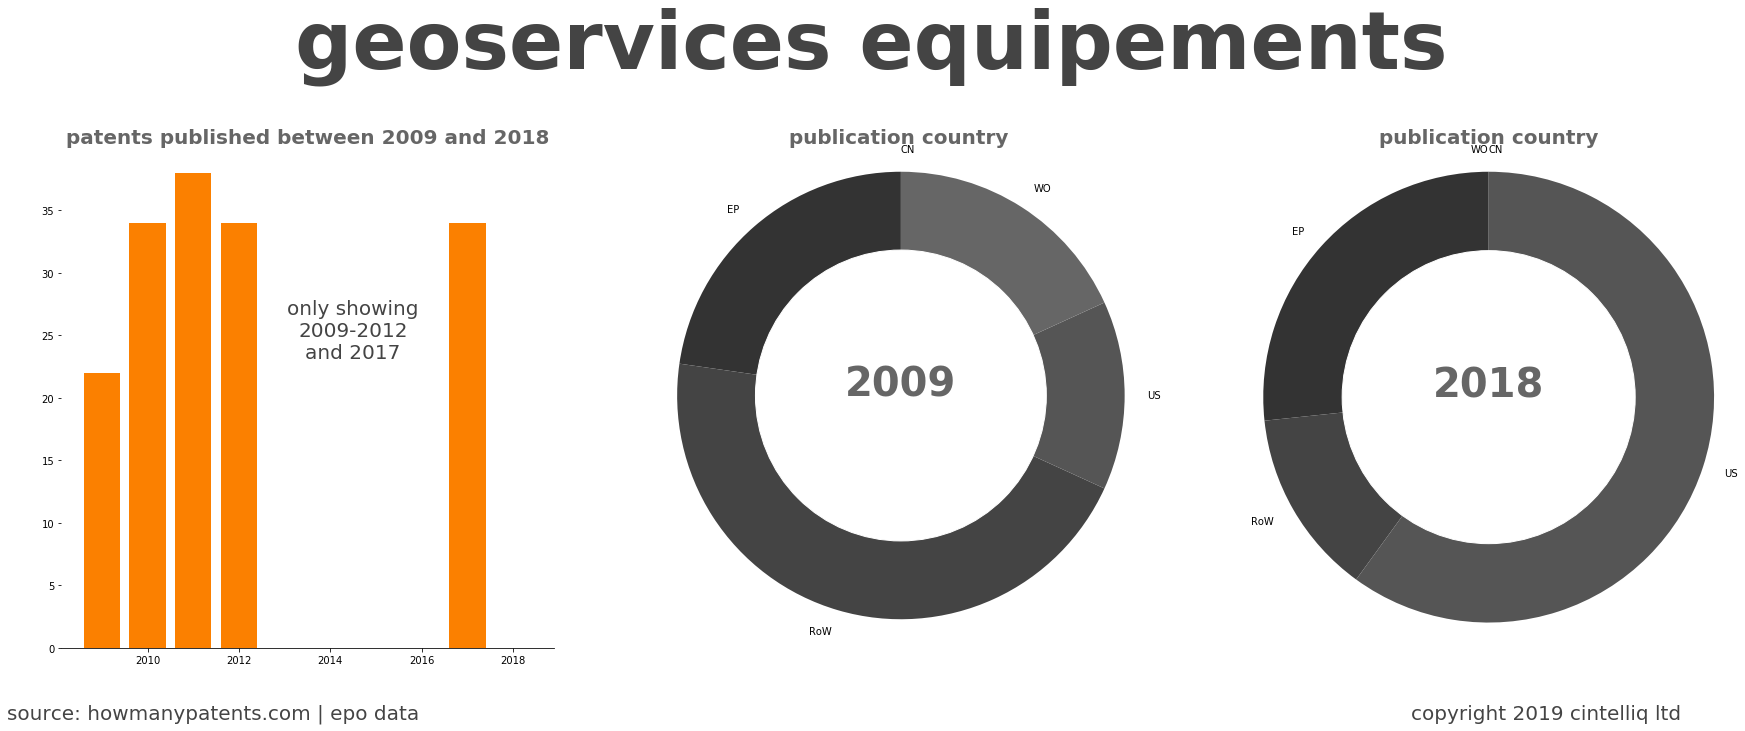 summary of patents for Geoservices Equipements